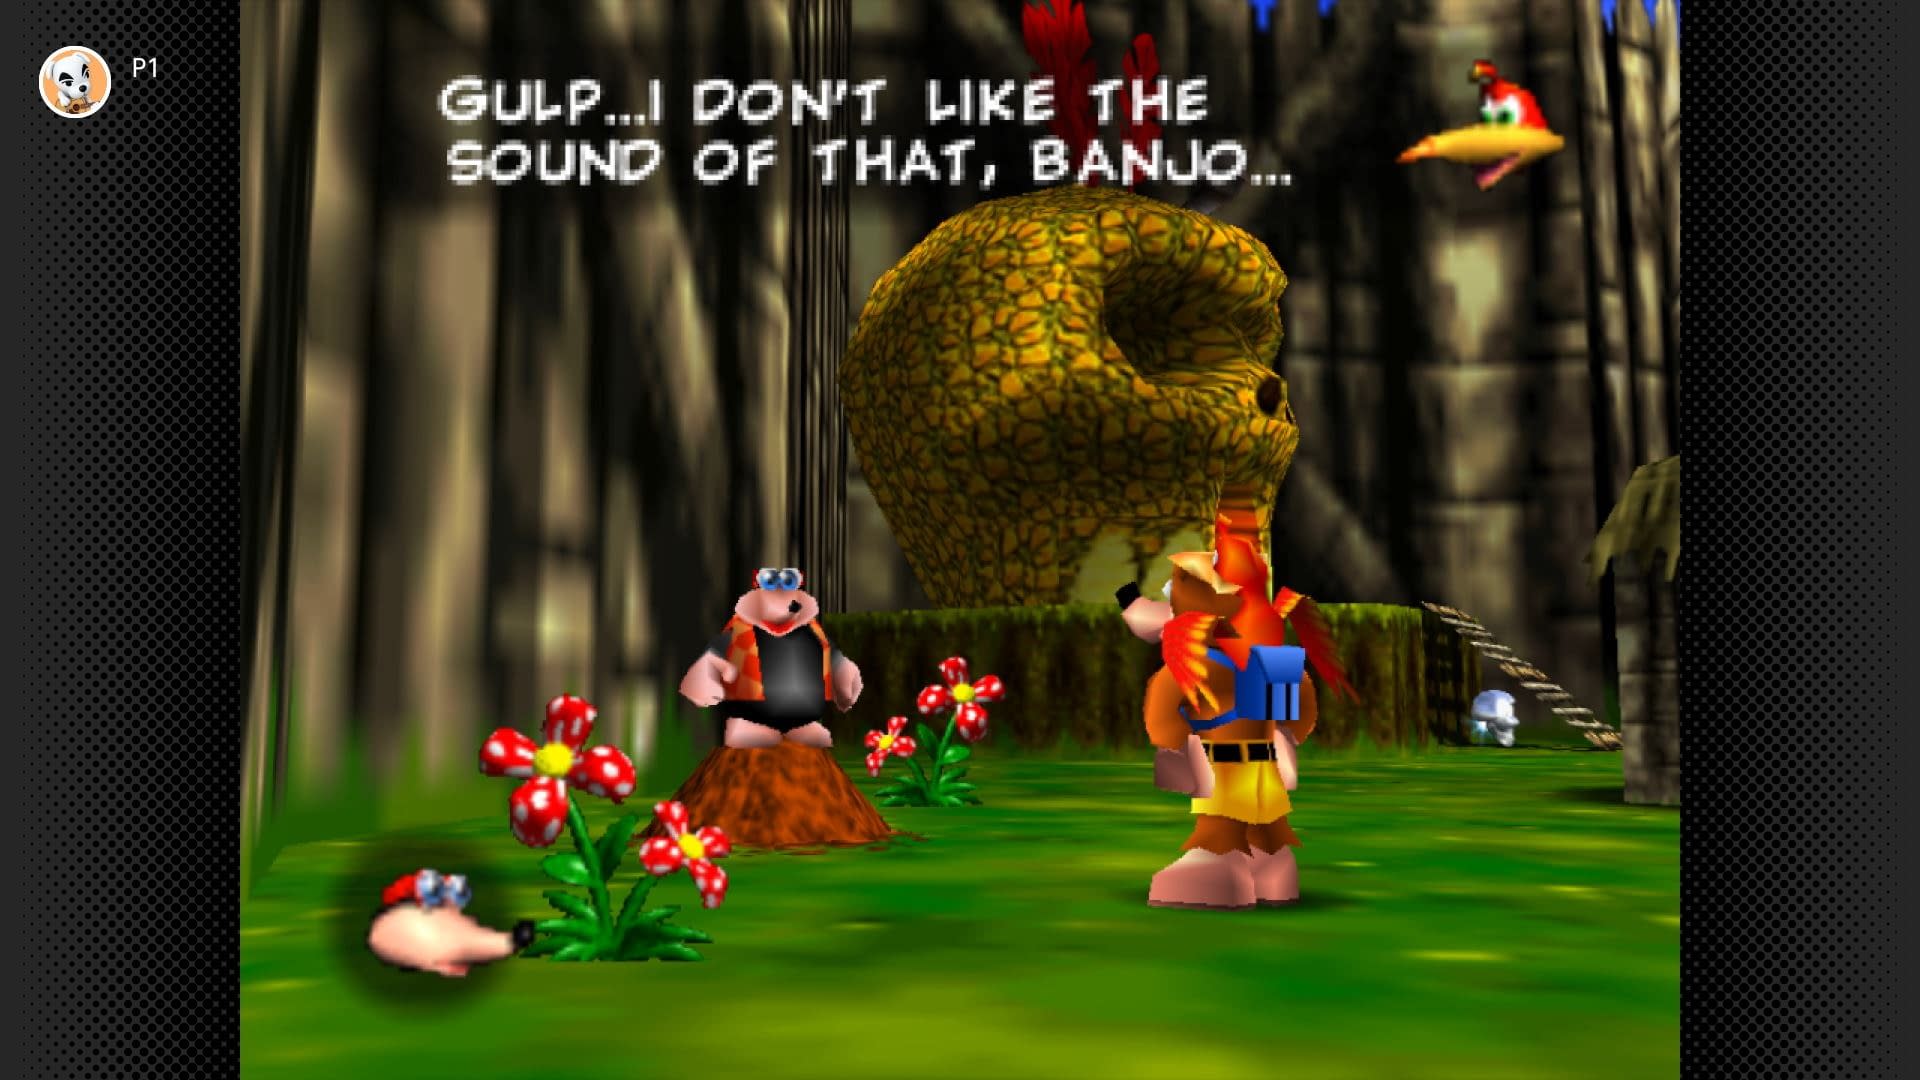 Banjo-Kazooie is coming to Nintendo Switch Online + Expansion Pack